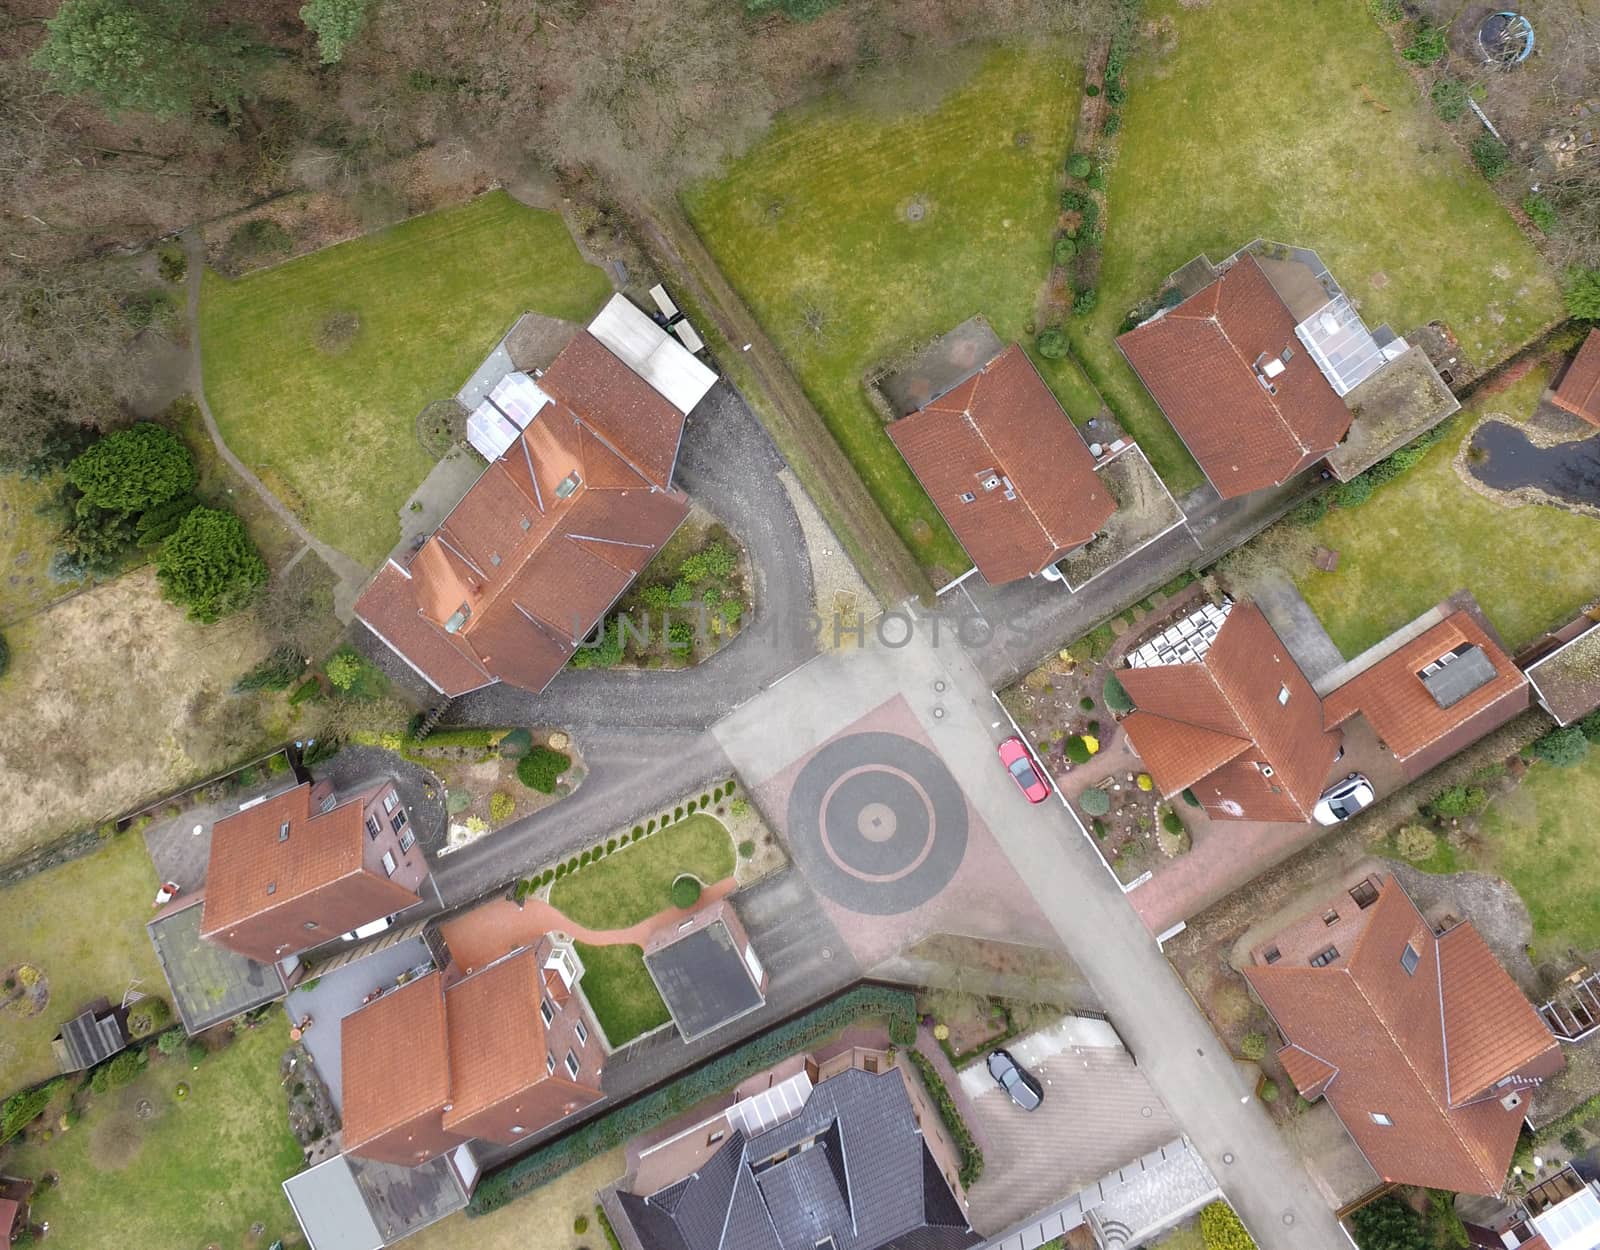 Aerial view of an old housing estate on the outskirts of the city, drones shot